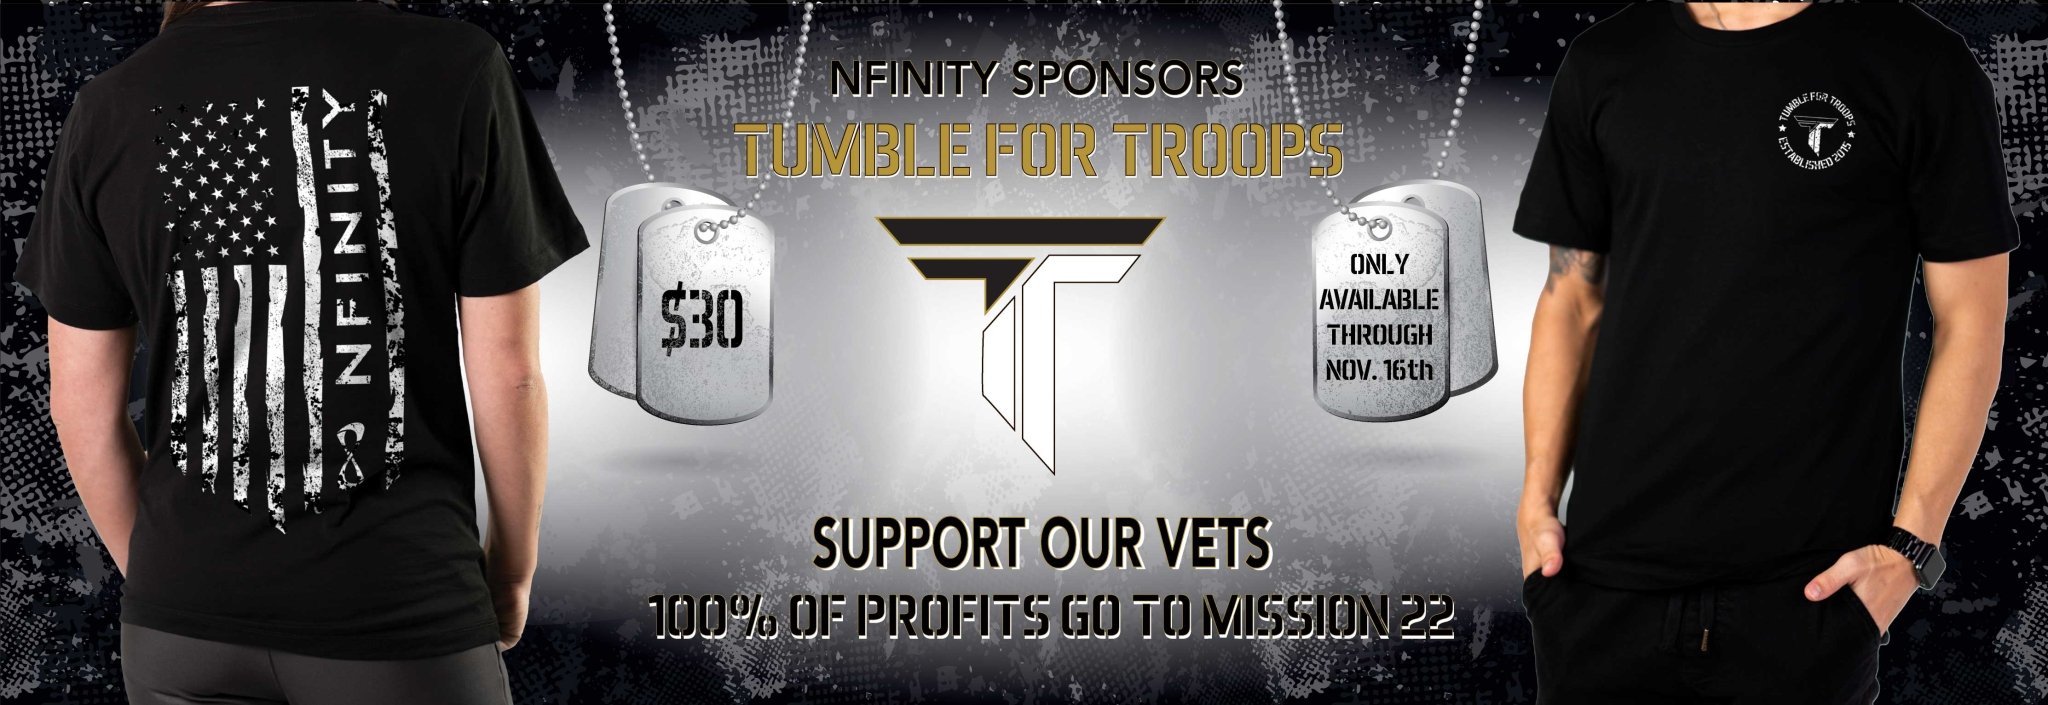 Tumble For Troops - Nfinity